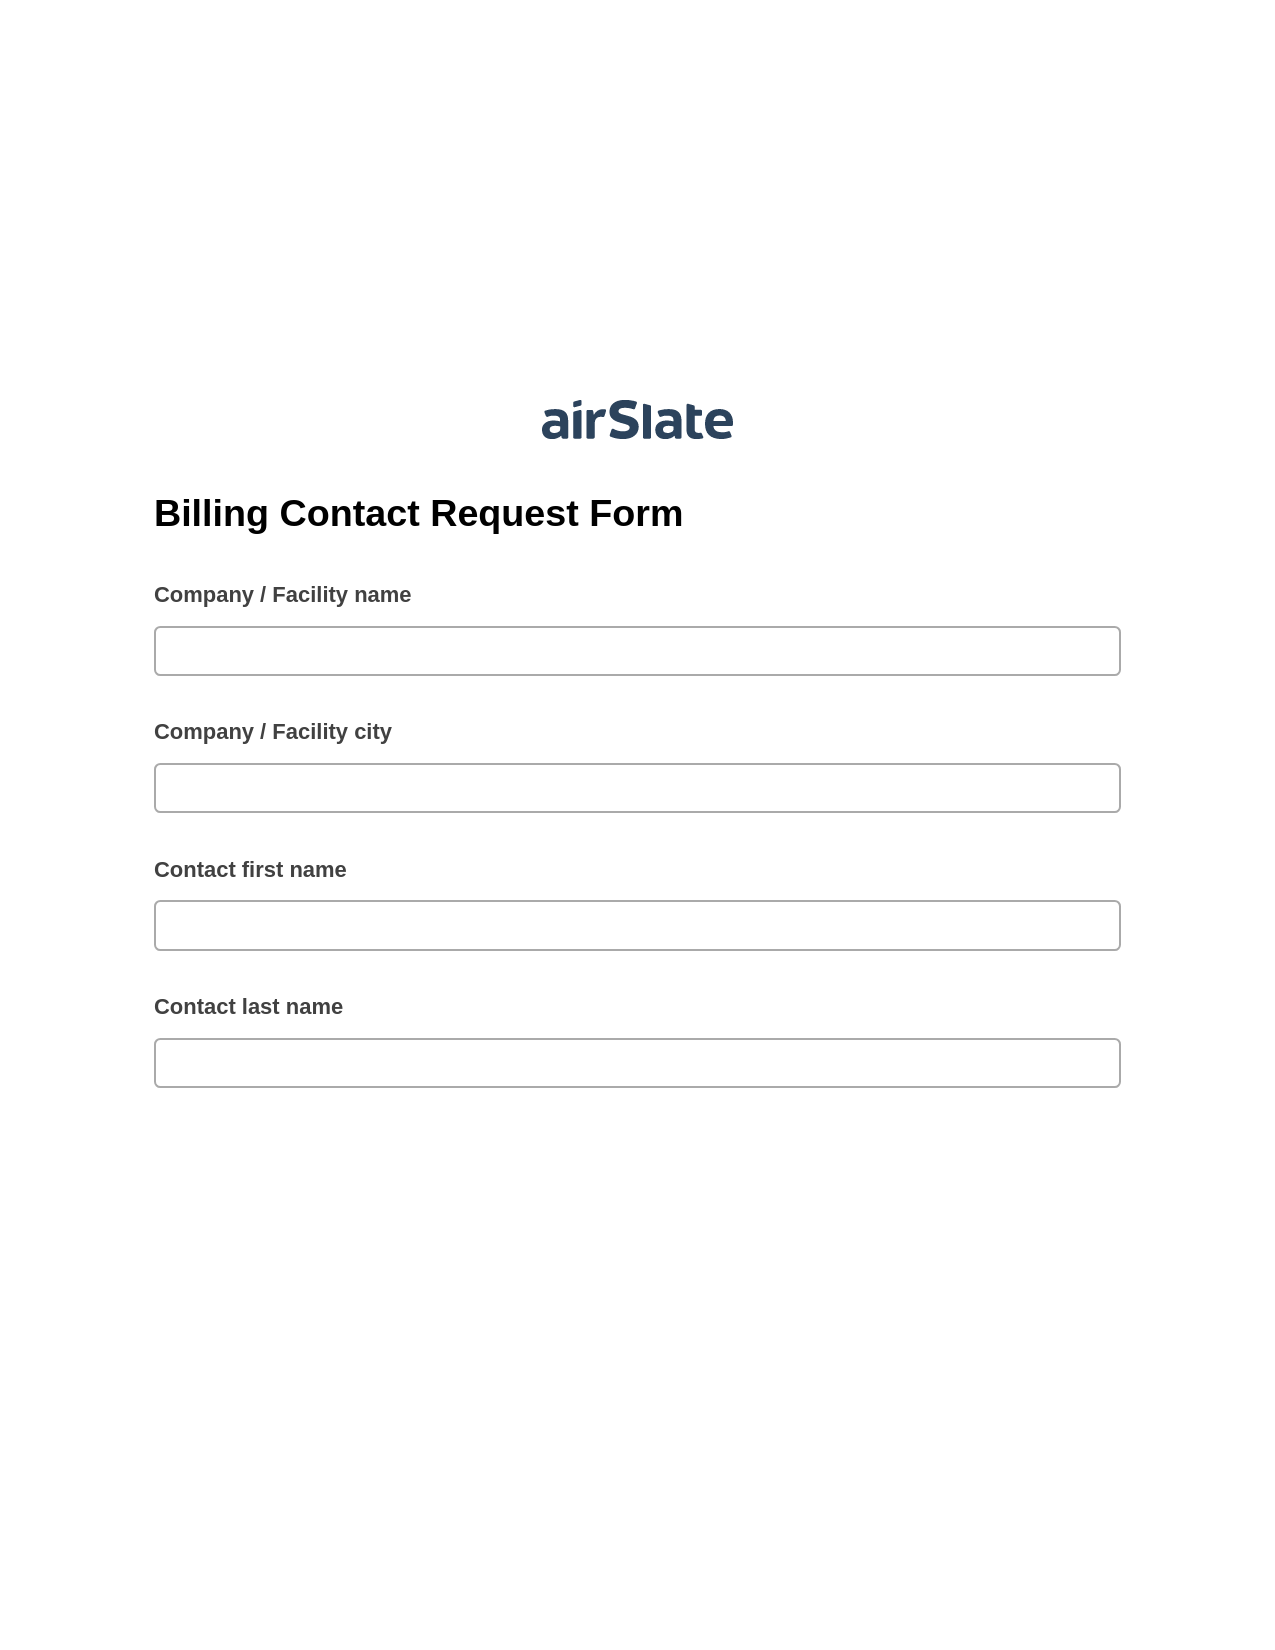 Billing Contact Request Form Pre-fill Slate from MS Dynamics 365 Records Bot, Jira Bot, Export to Smartsheet